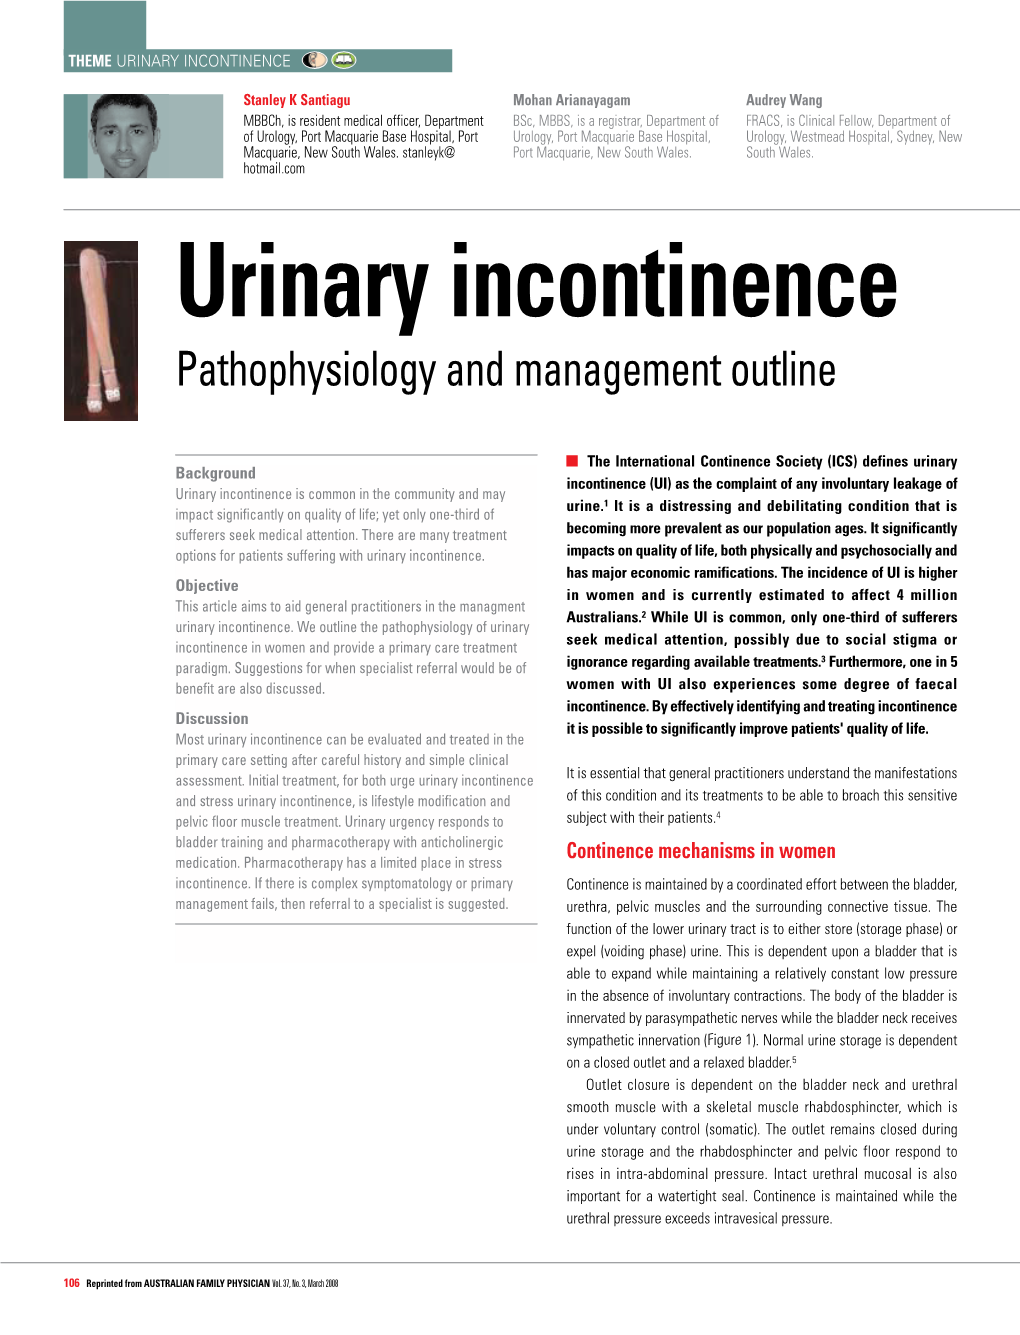 URINARY Incontinence